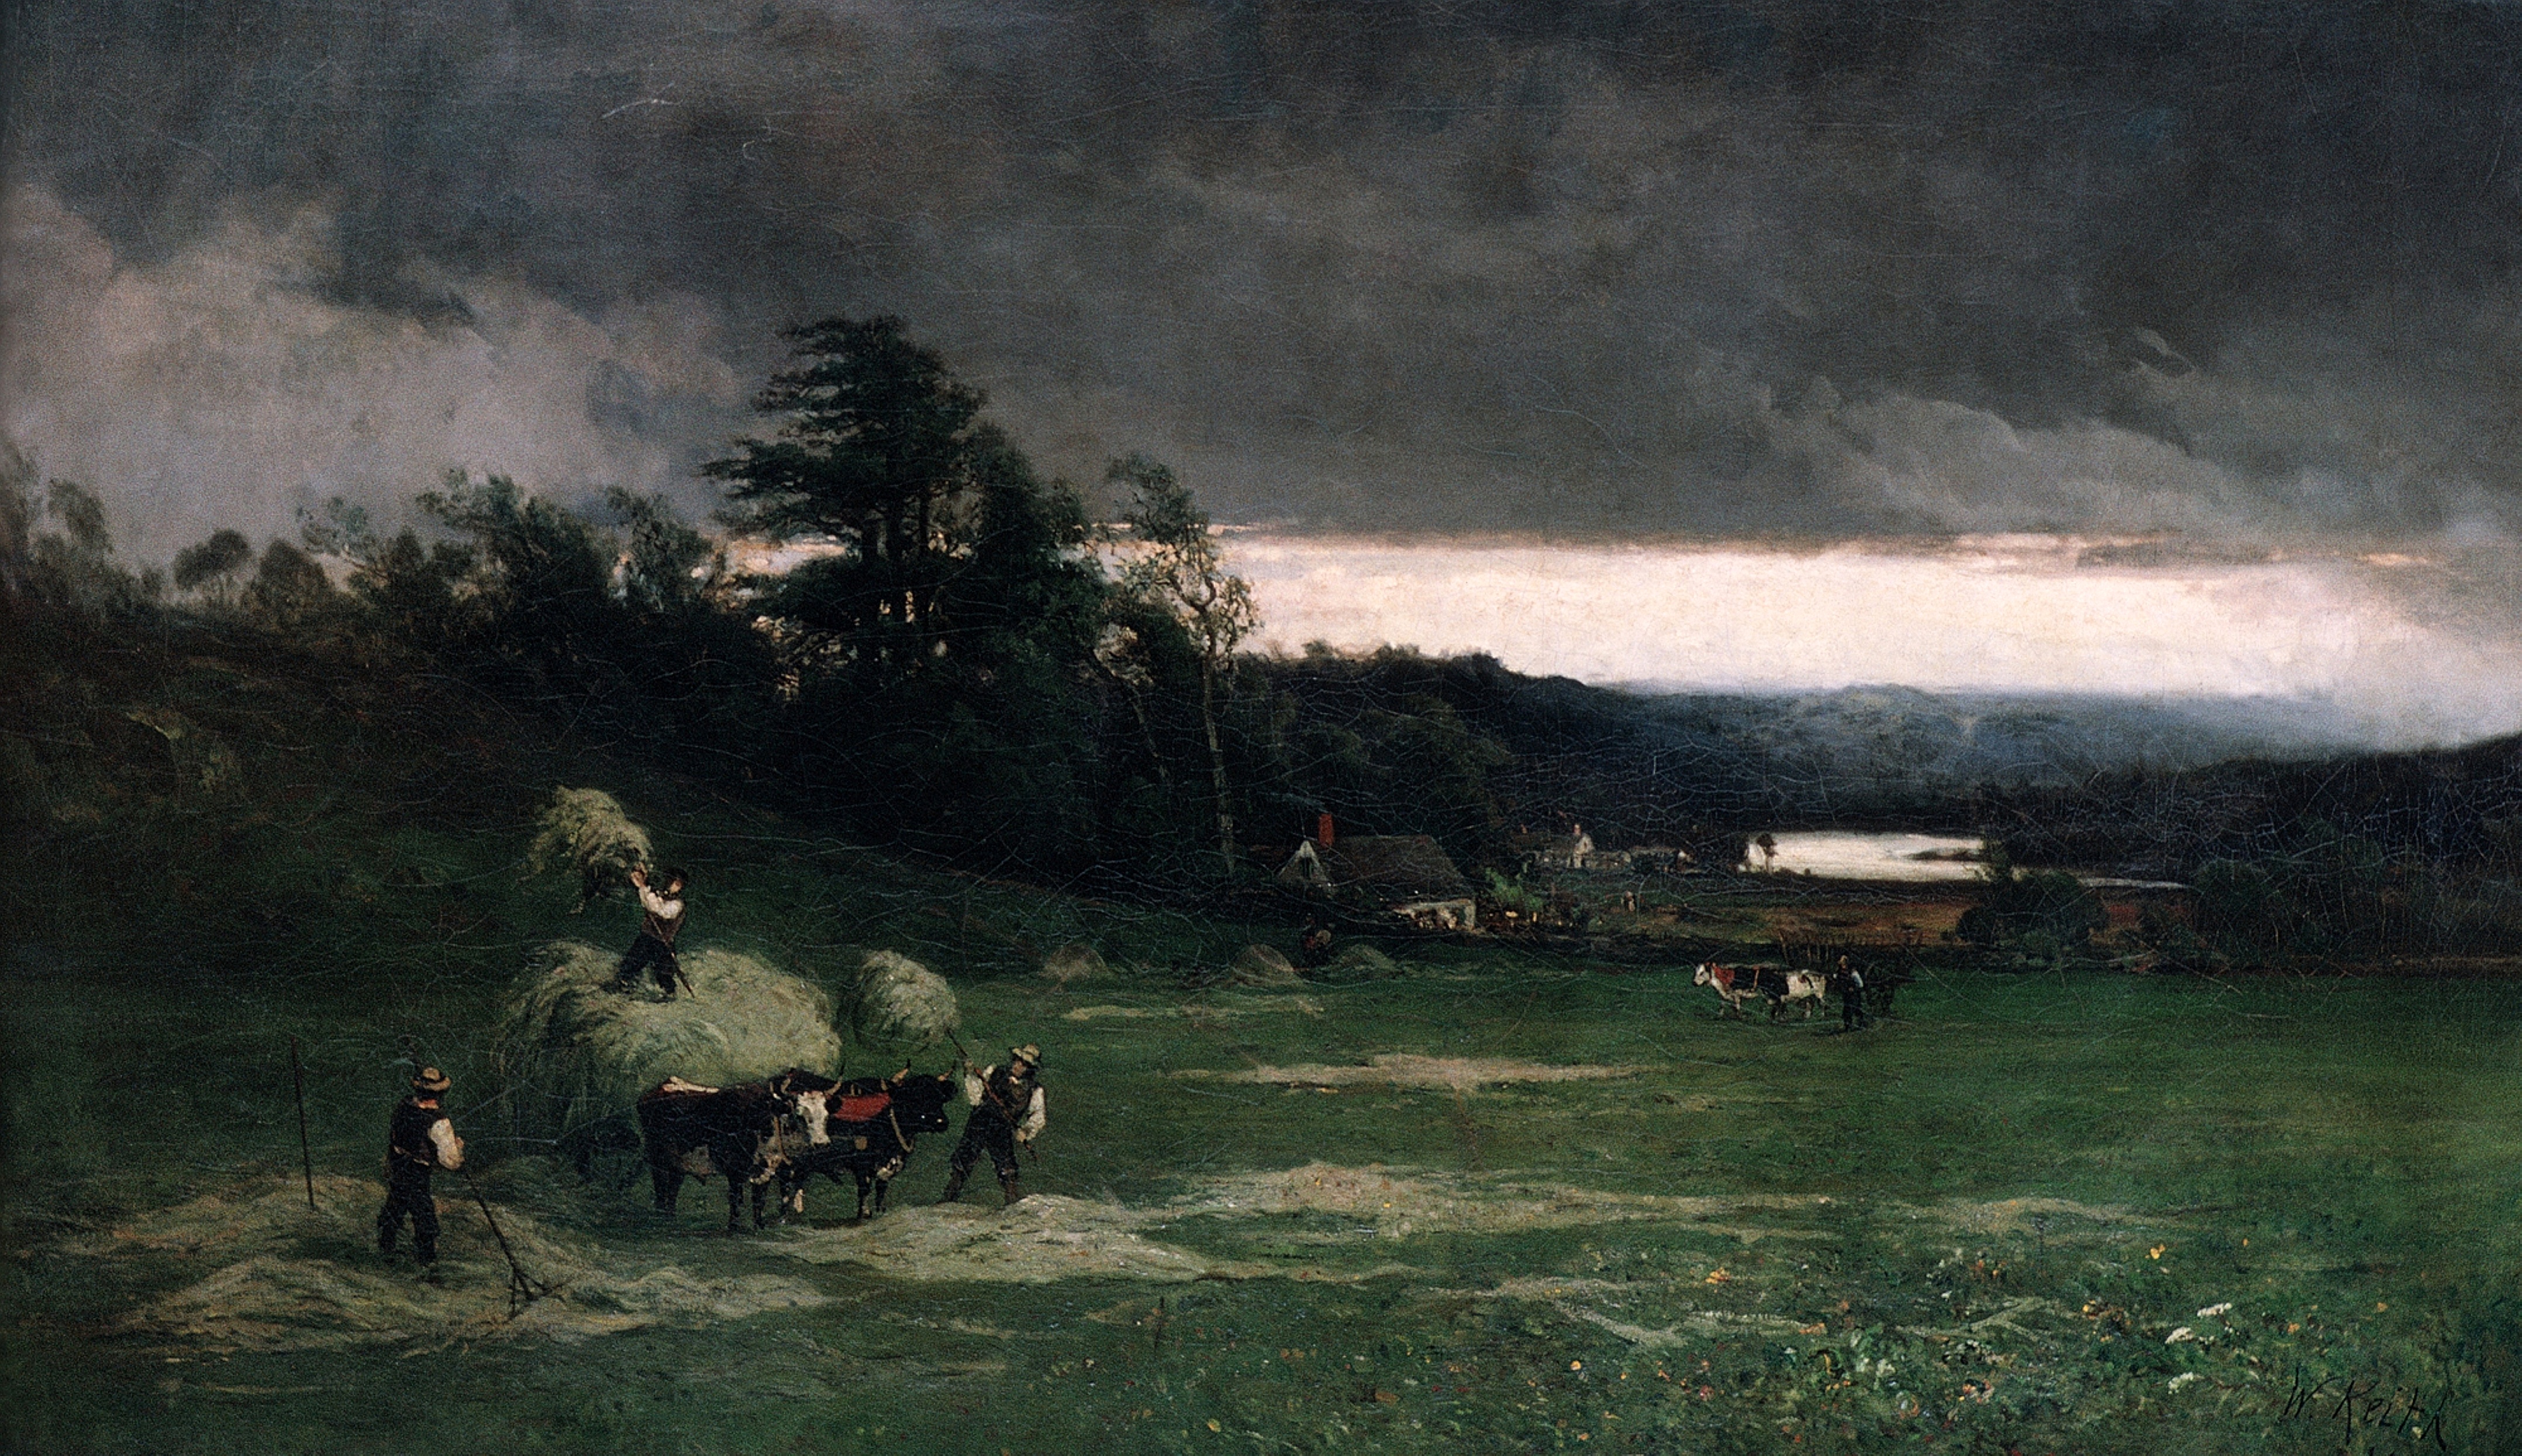 Approaching Storm by William Keith, 1880